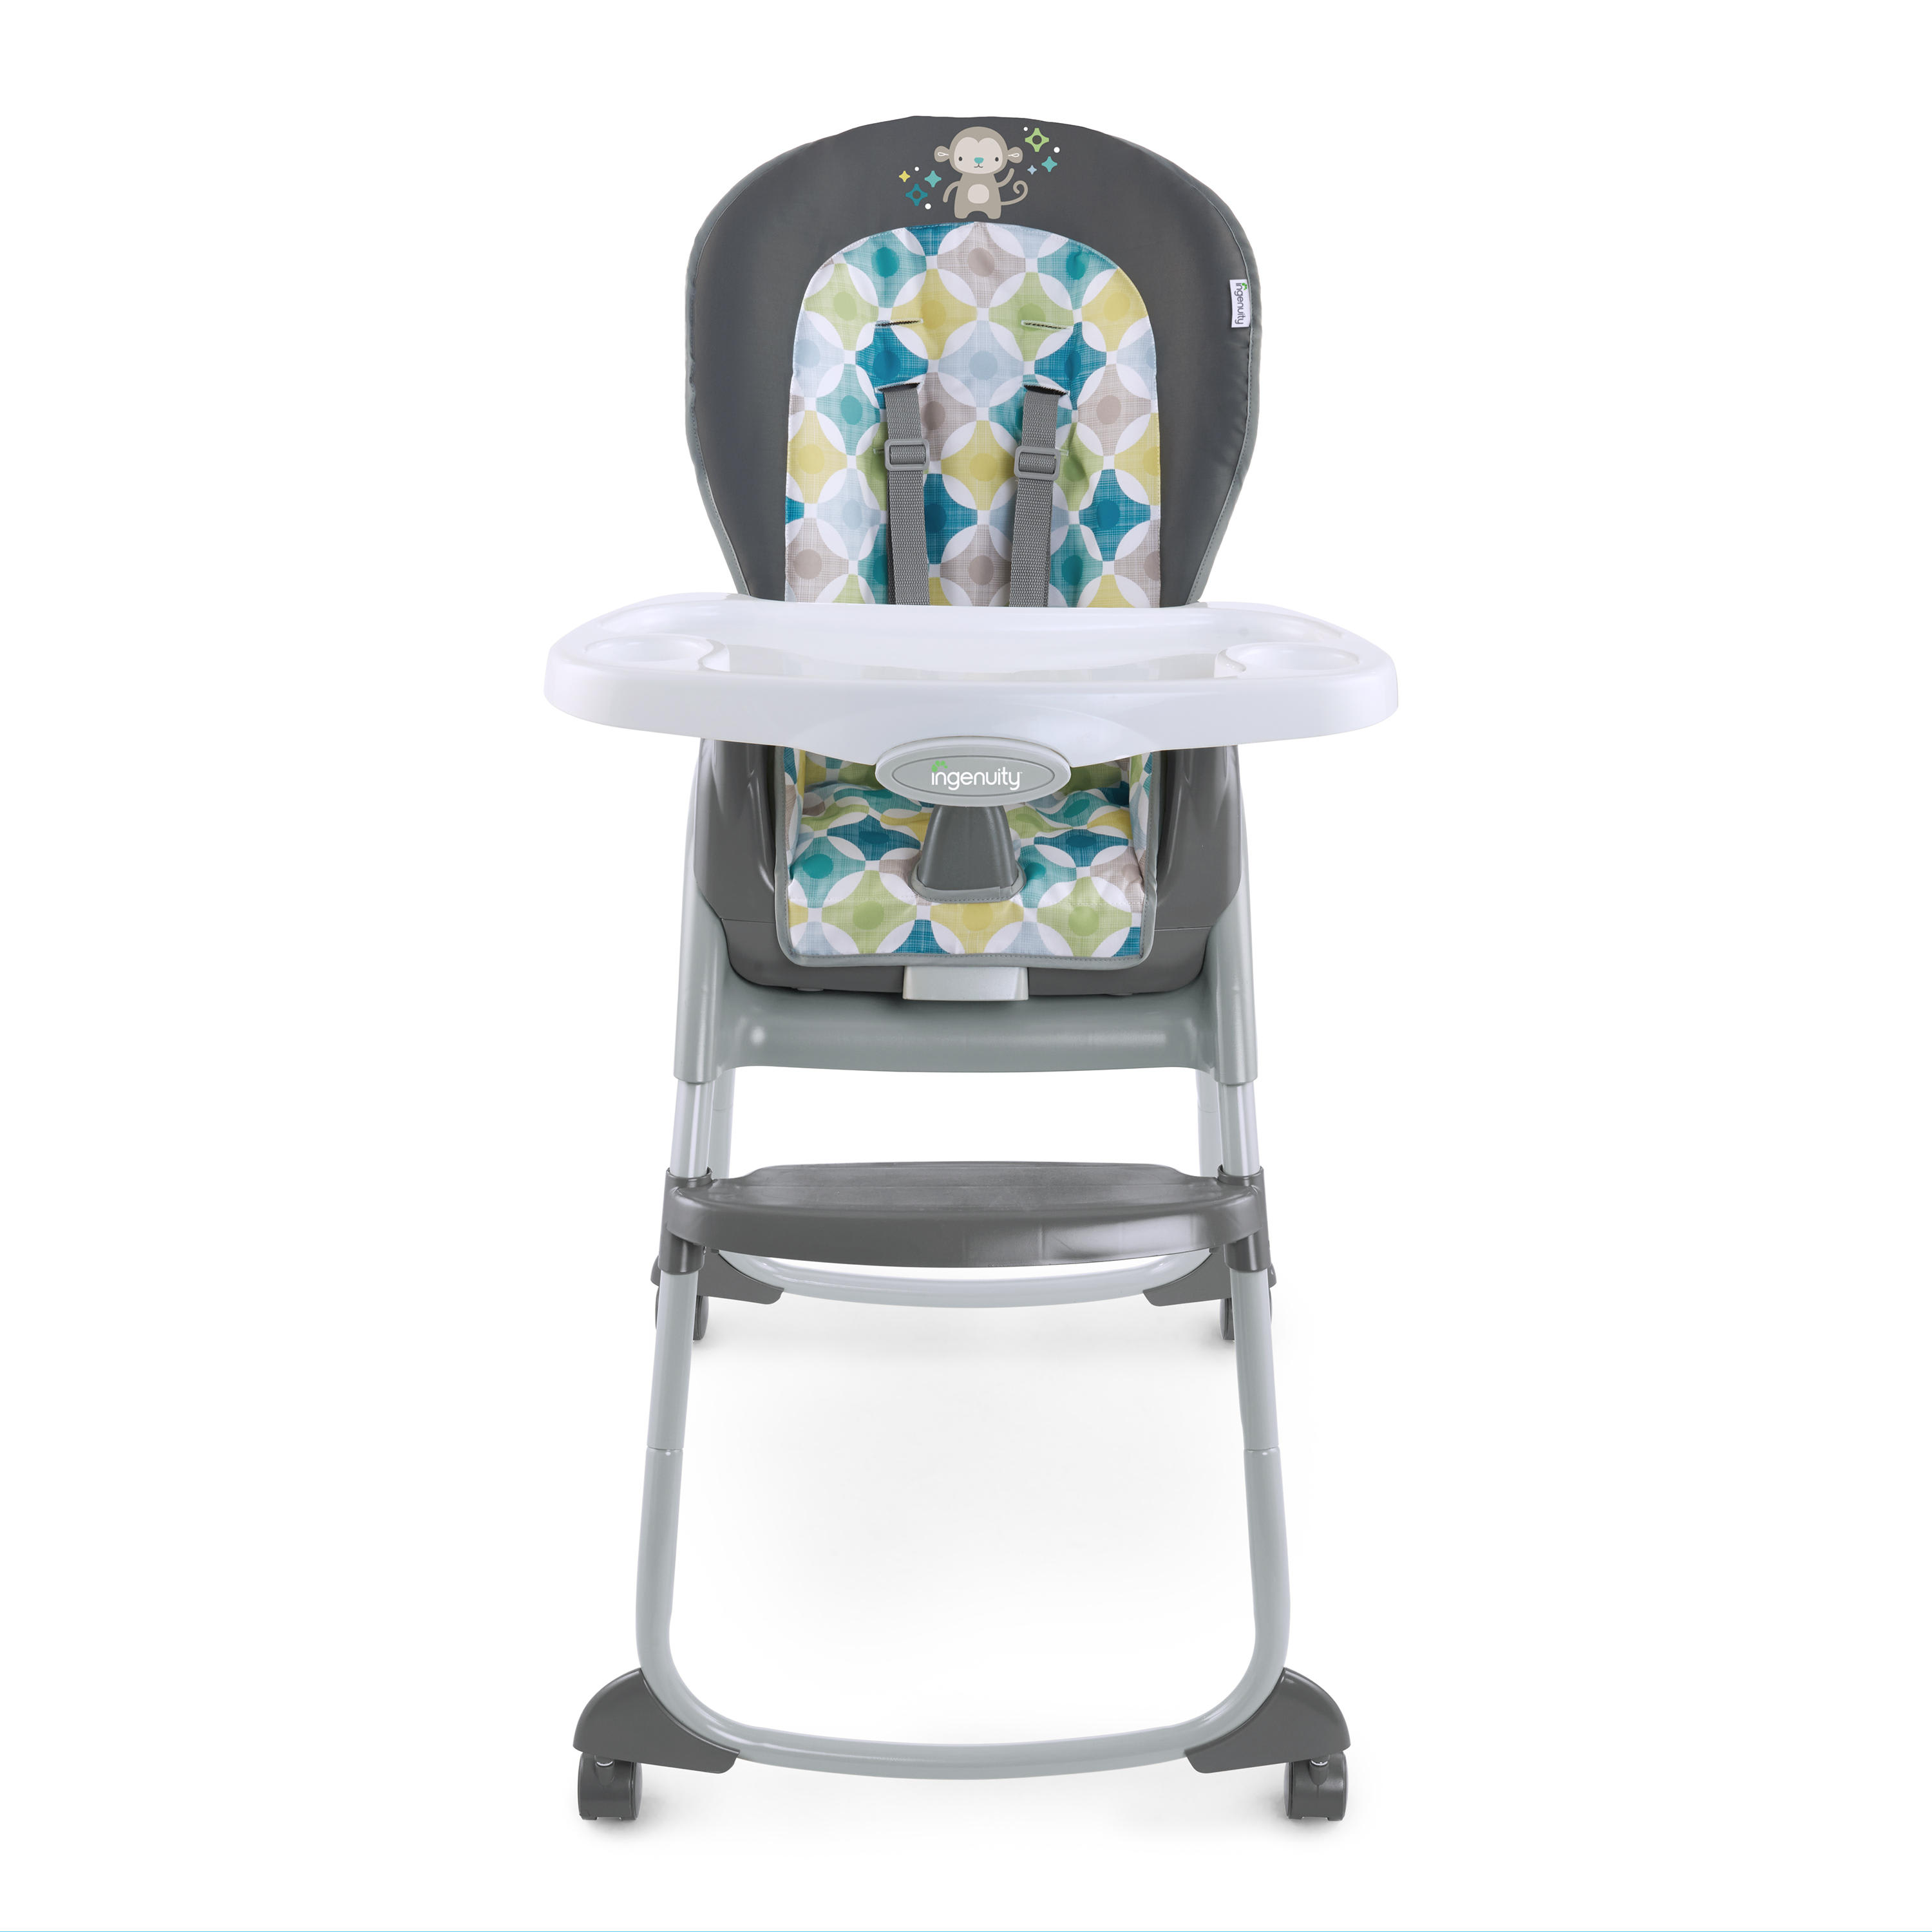 Ingenuity Trio 3-in-1 High Chair - Moreland - image 1 of 12